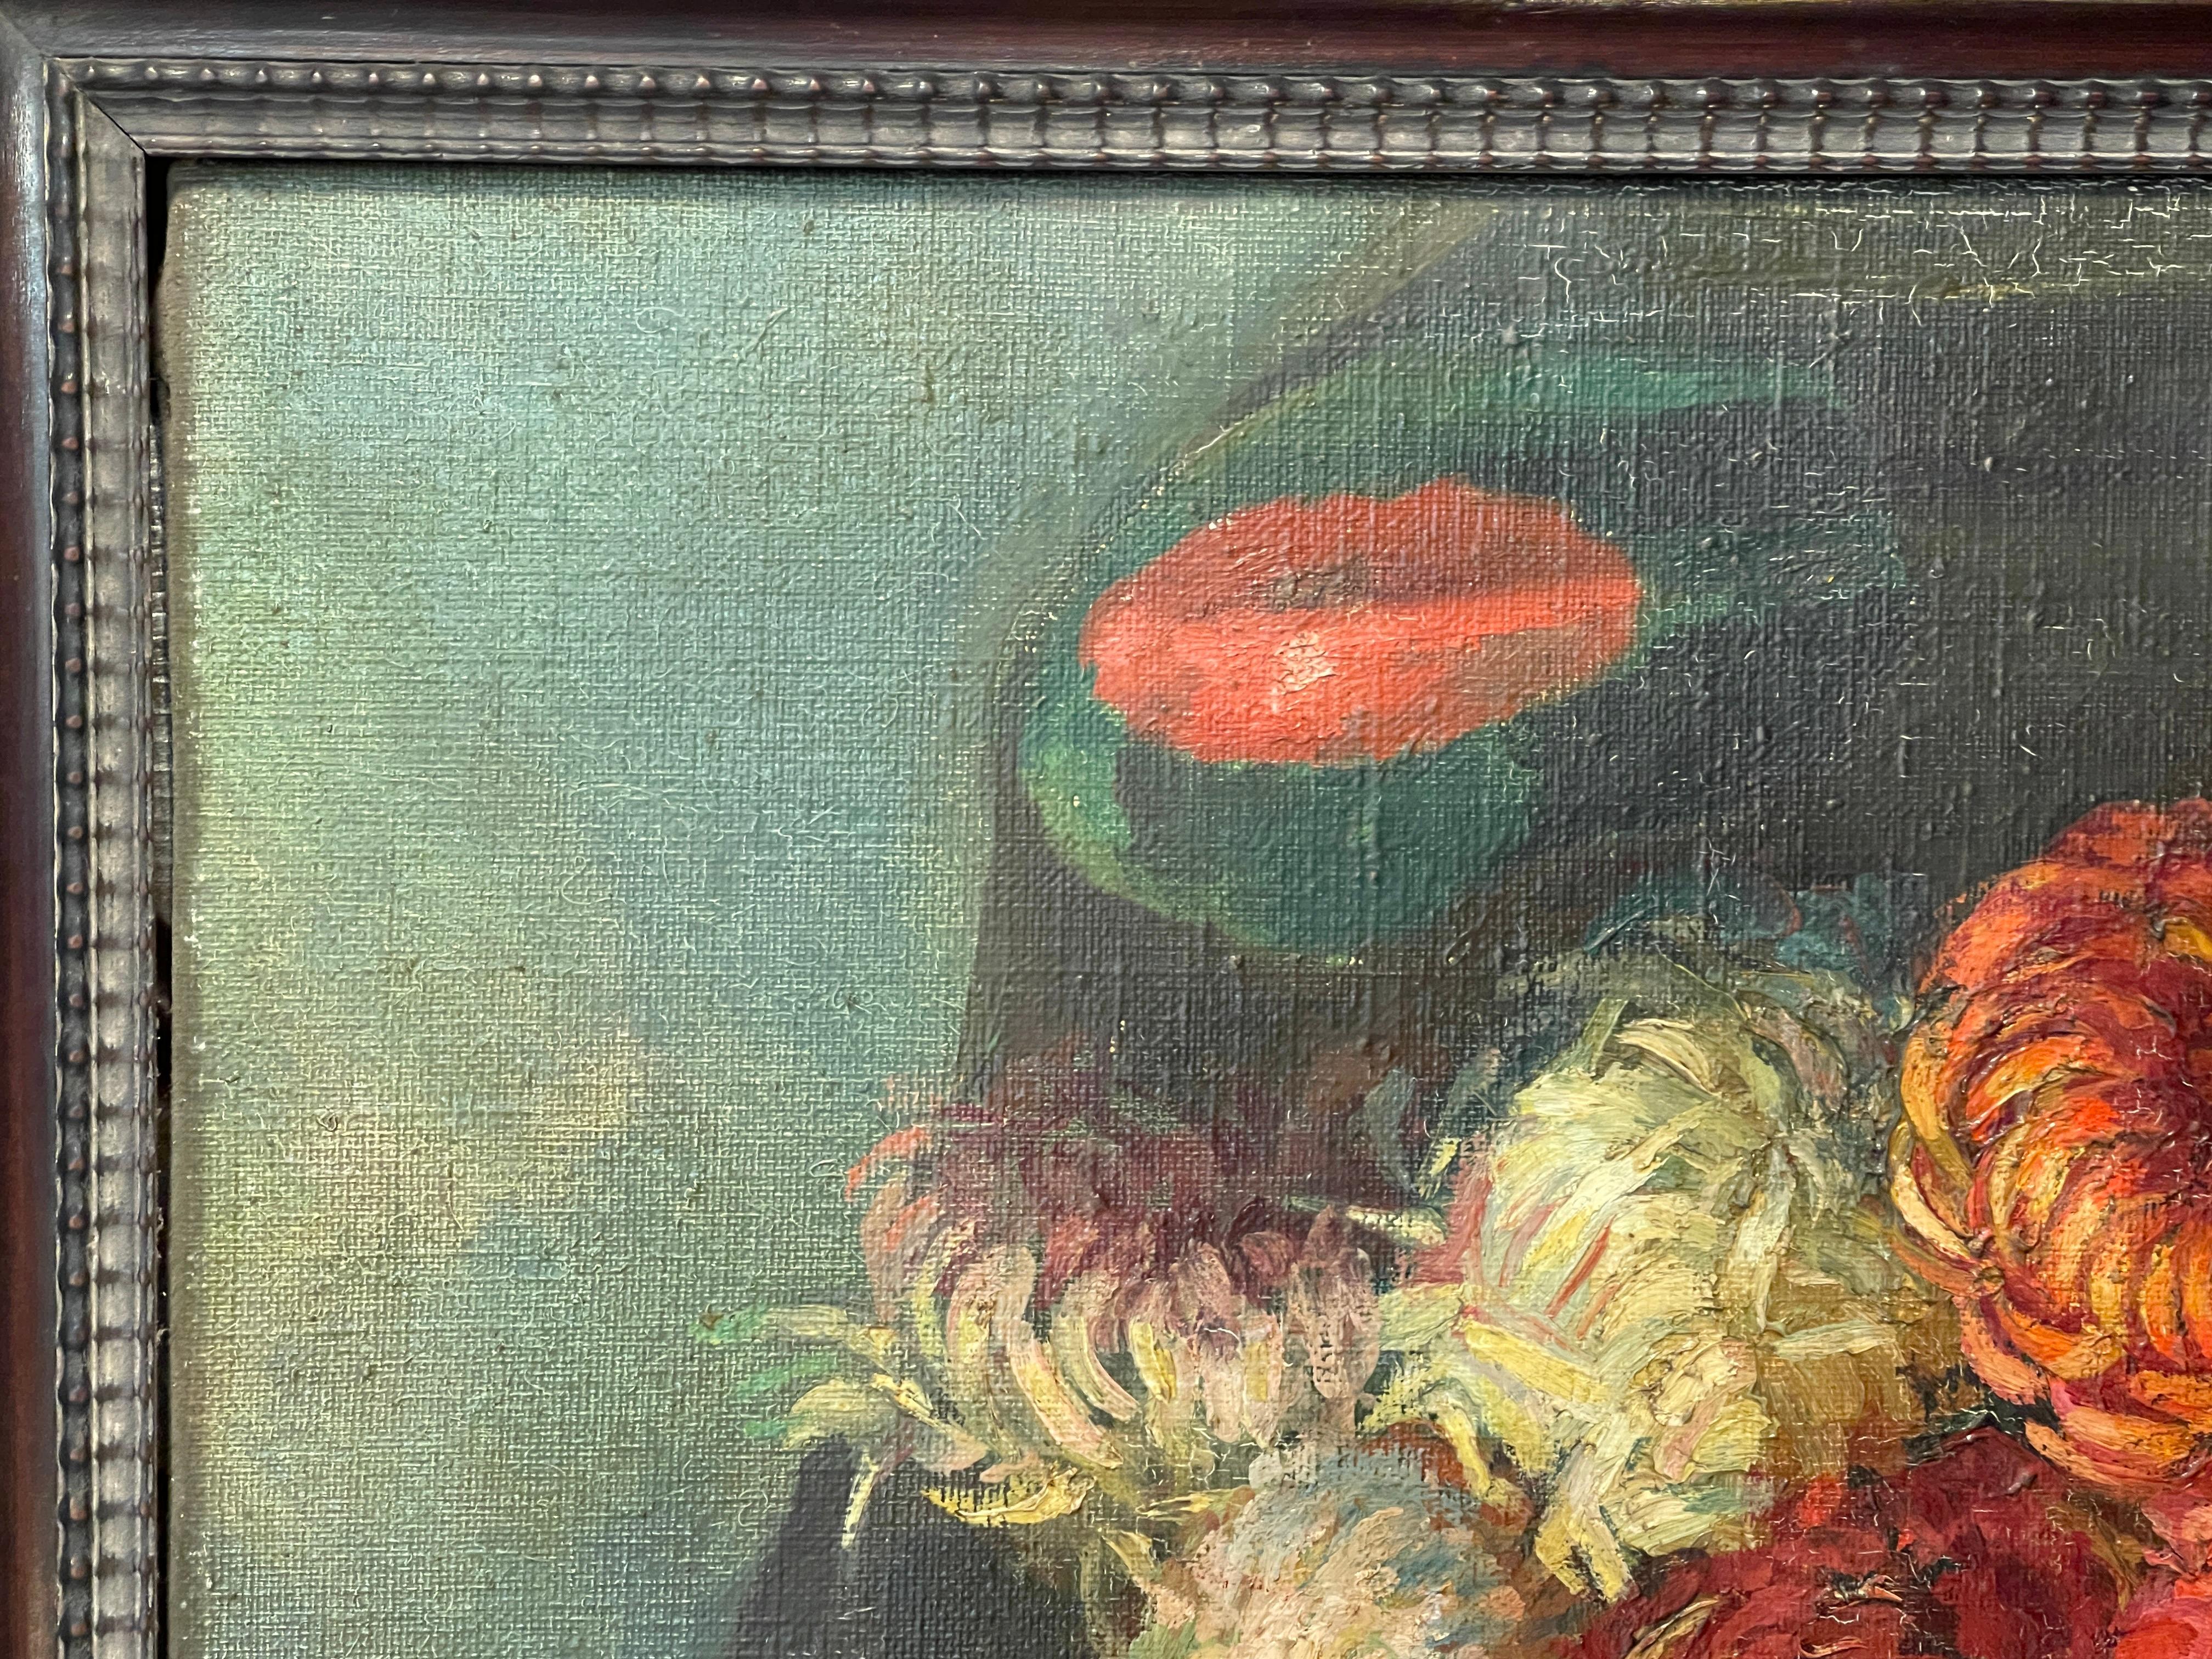 Hand-Painted Oil painting on canvas, late 19th century, flowers For Sale